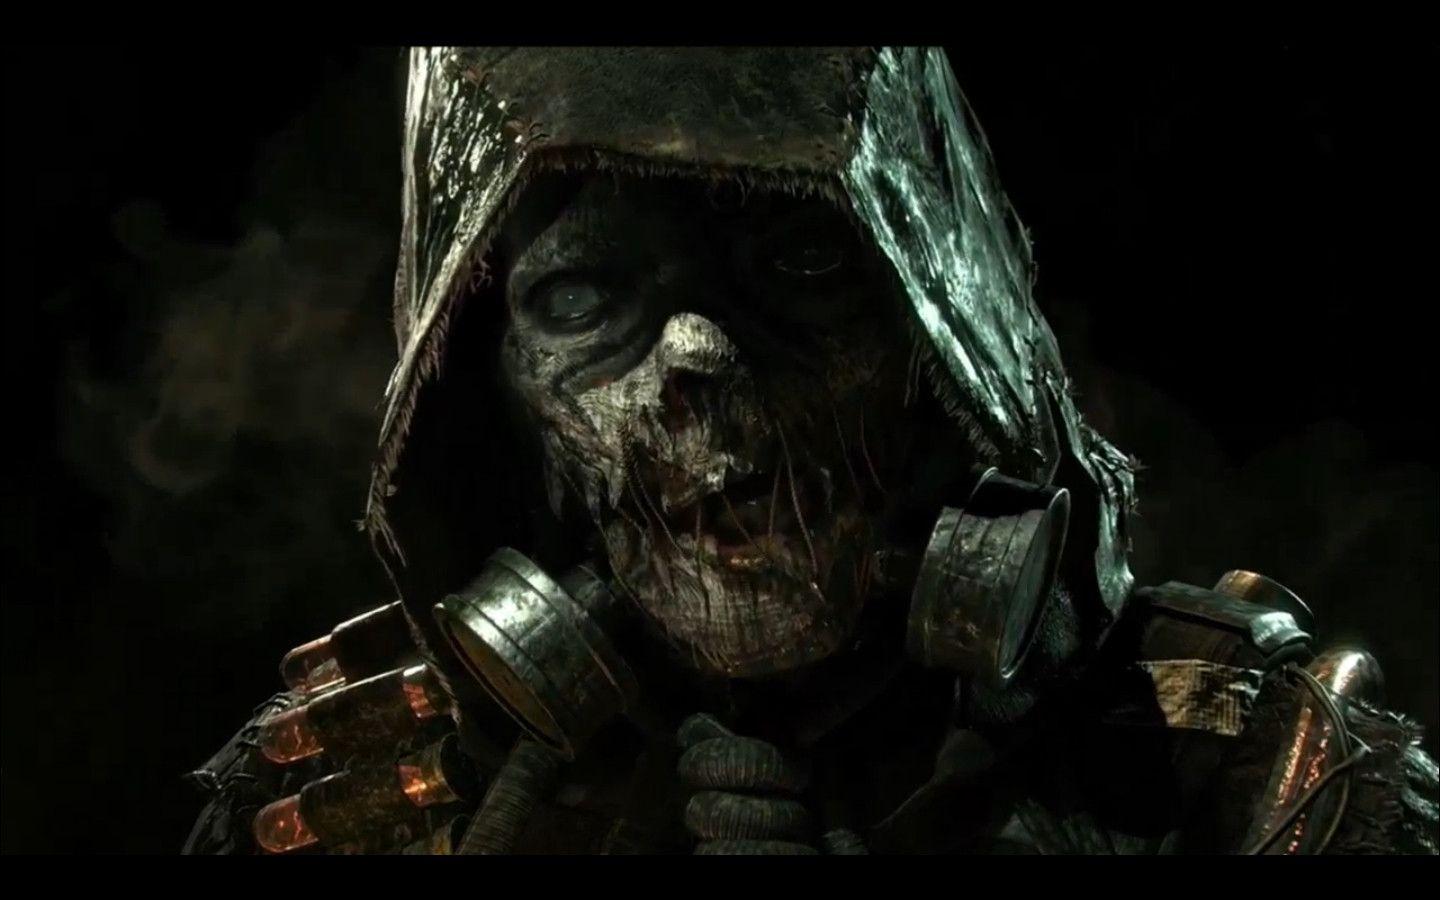 GenGAME Batman: Arkham Knight E3 2014 Features the Scarecrow